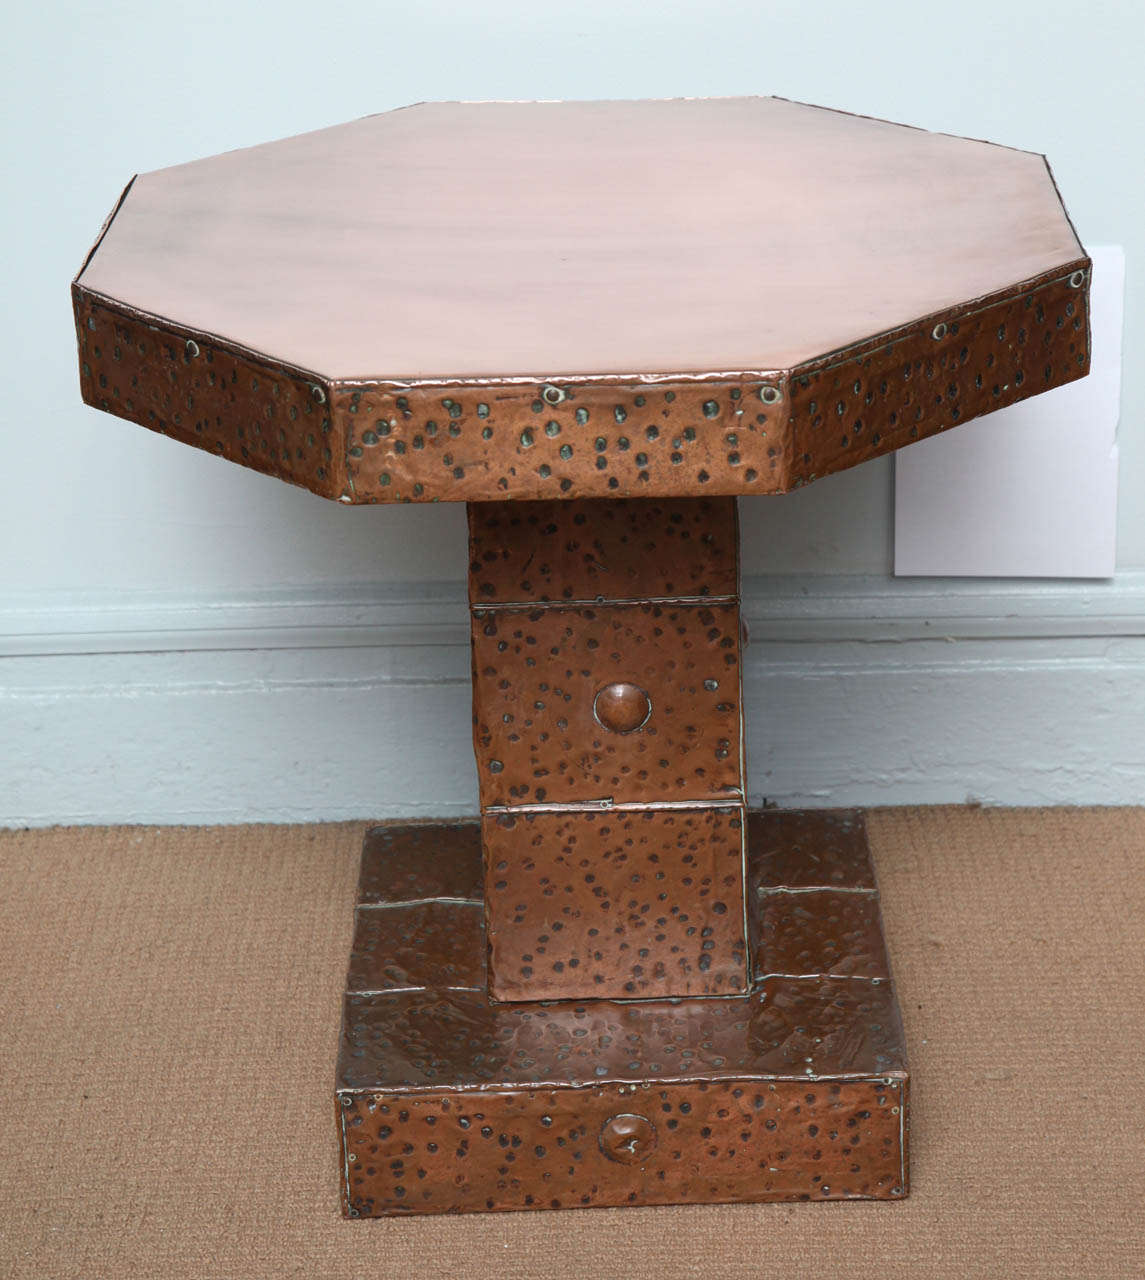 Unusual English Arts and Crafts hand hammered copper octagonal side table, the polished top with applied hammered edge, over square hammered shaft with round bosses, on hammered square platform base, the whole with pleasing patina.  Mirrors and